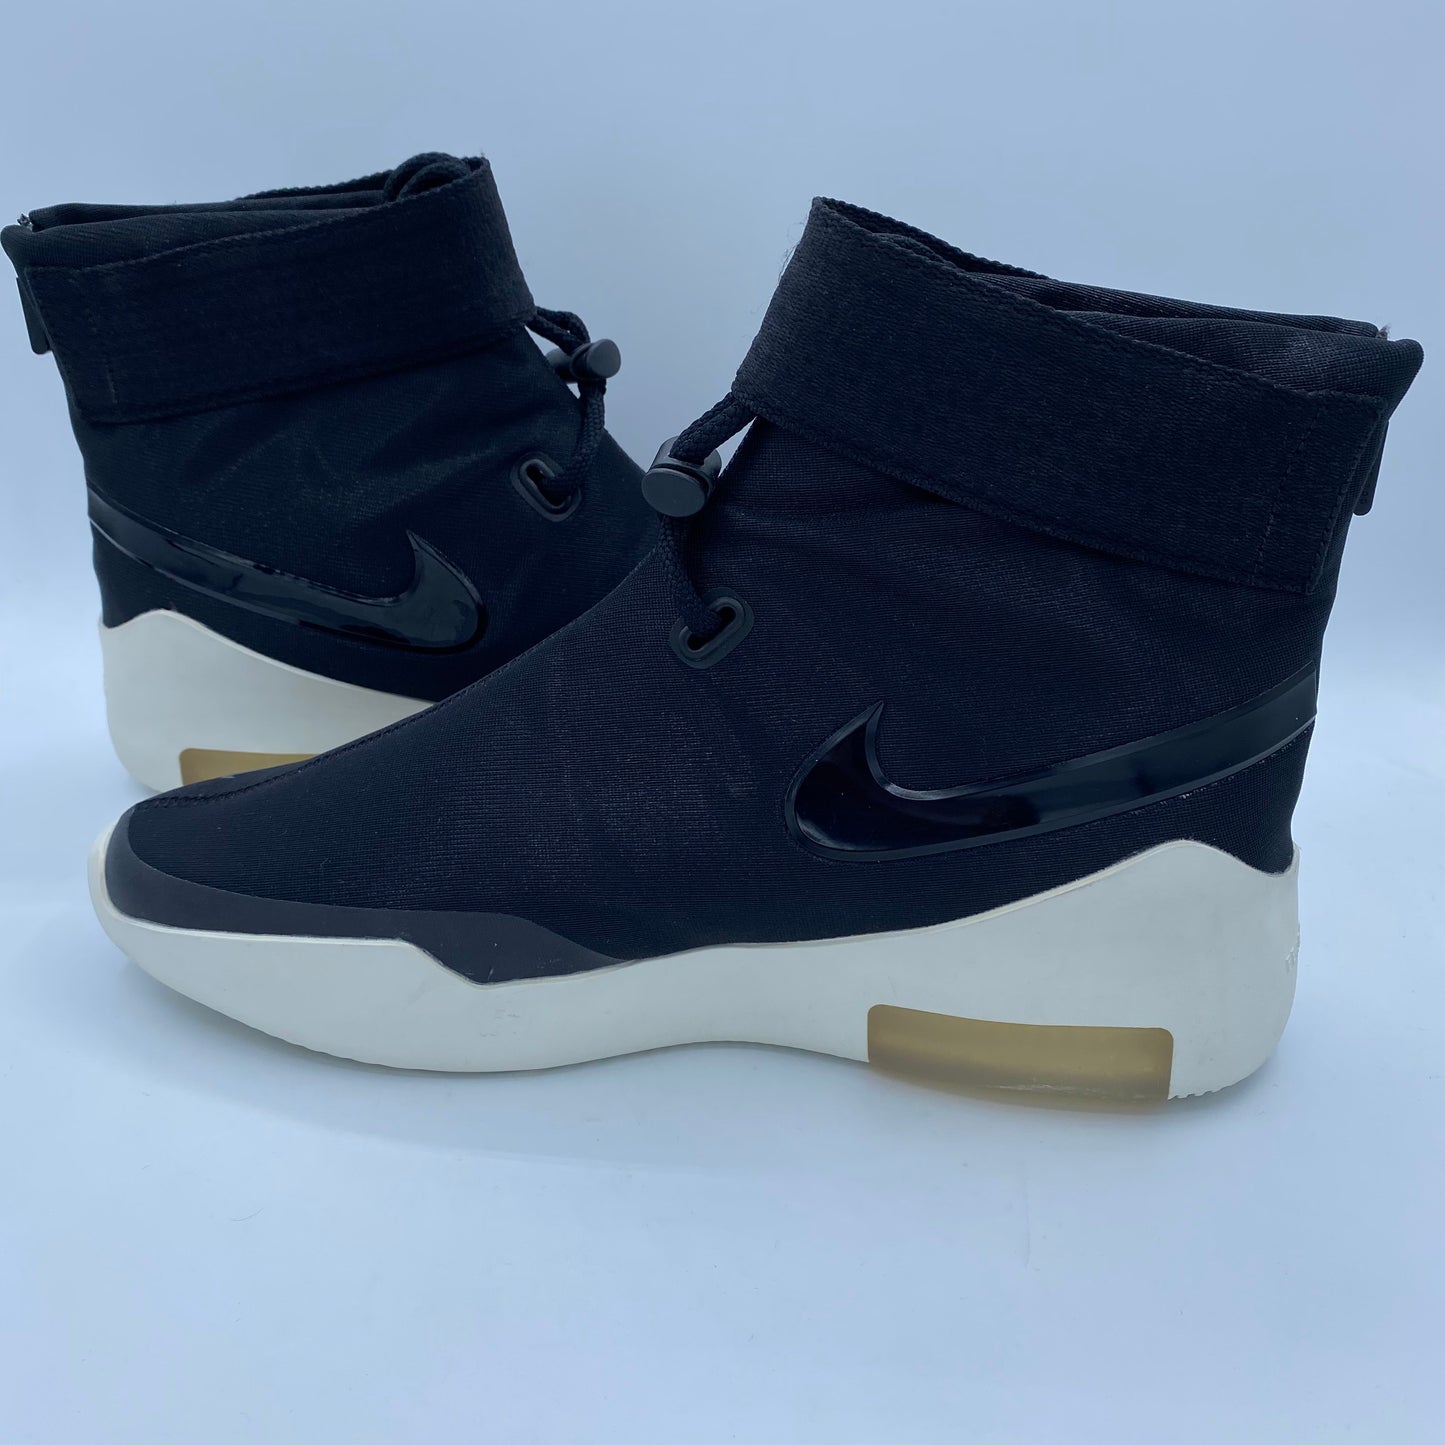 Nike Air Fear of God Shoot-Around Black (Worn Once)